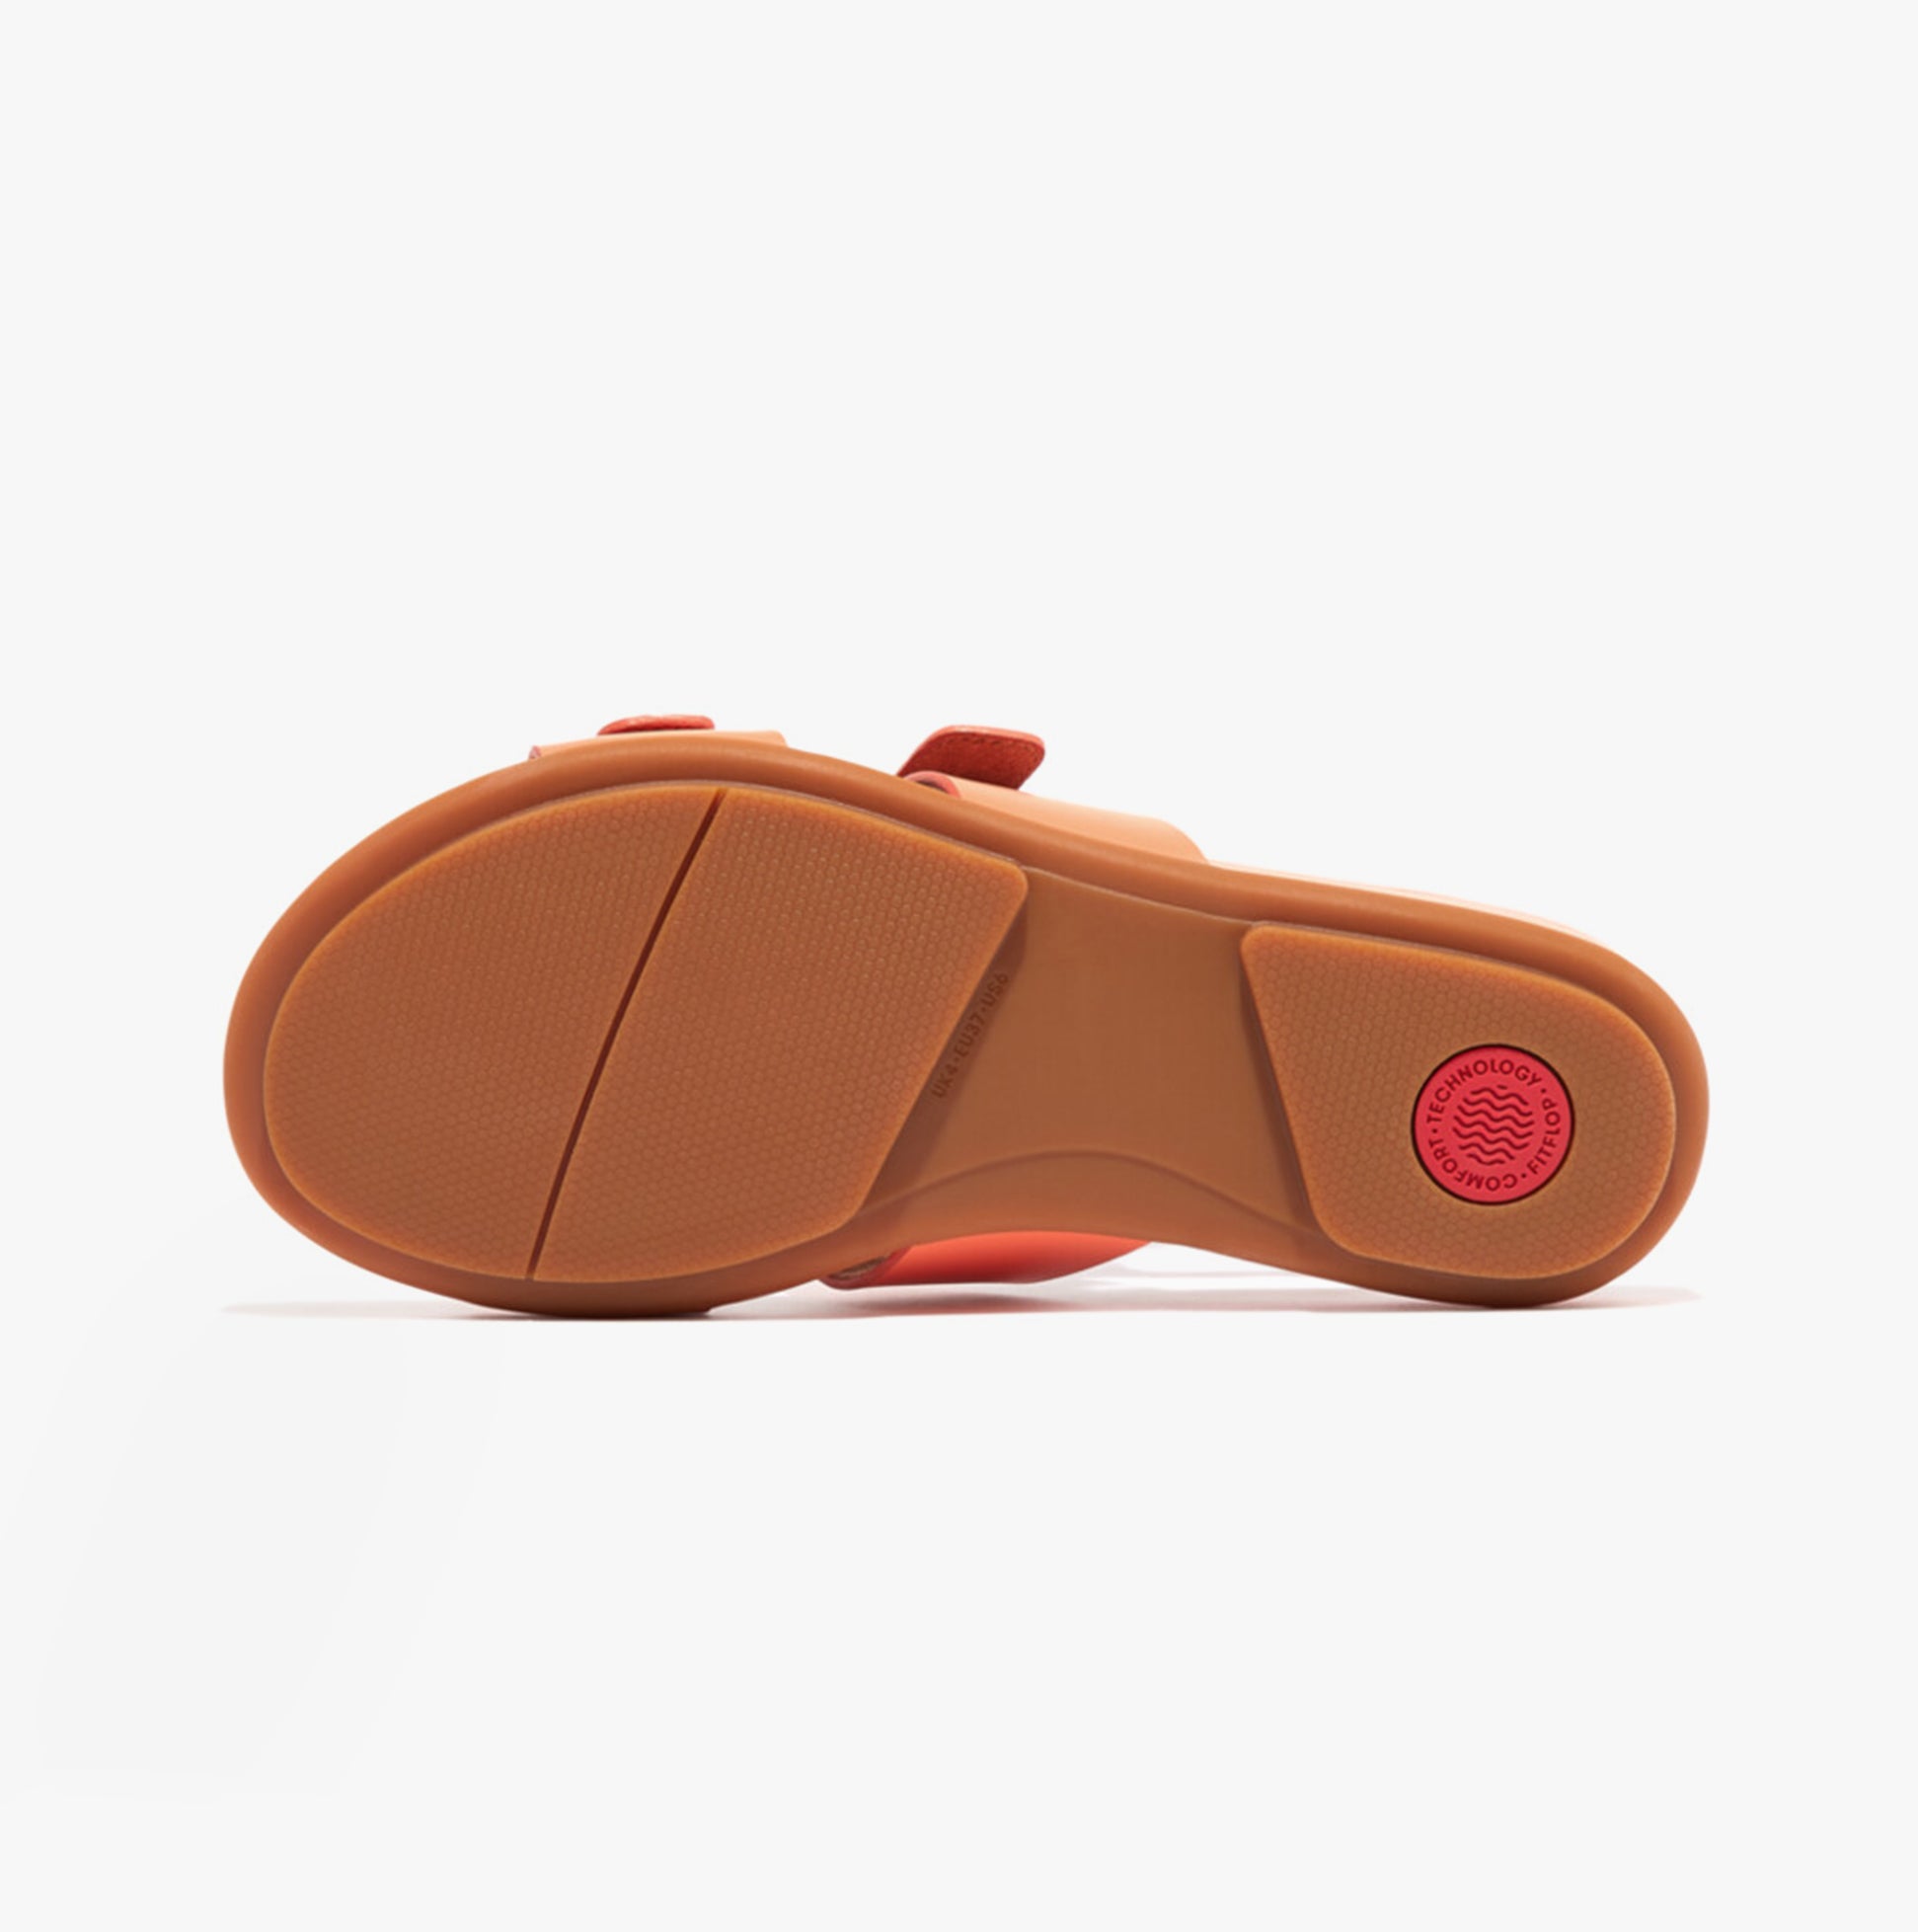 FitFlop-[FV1-580]-Coral-5.jpg